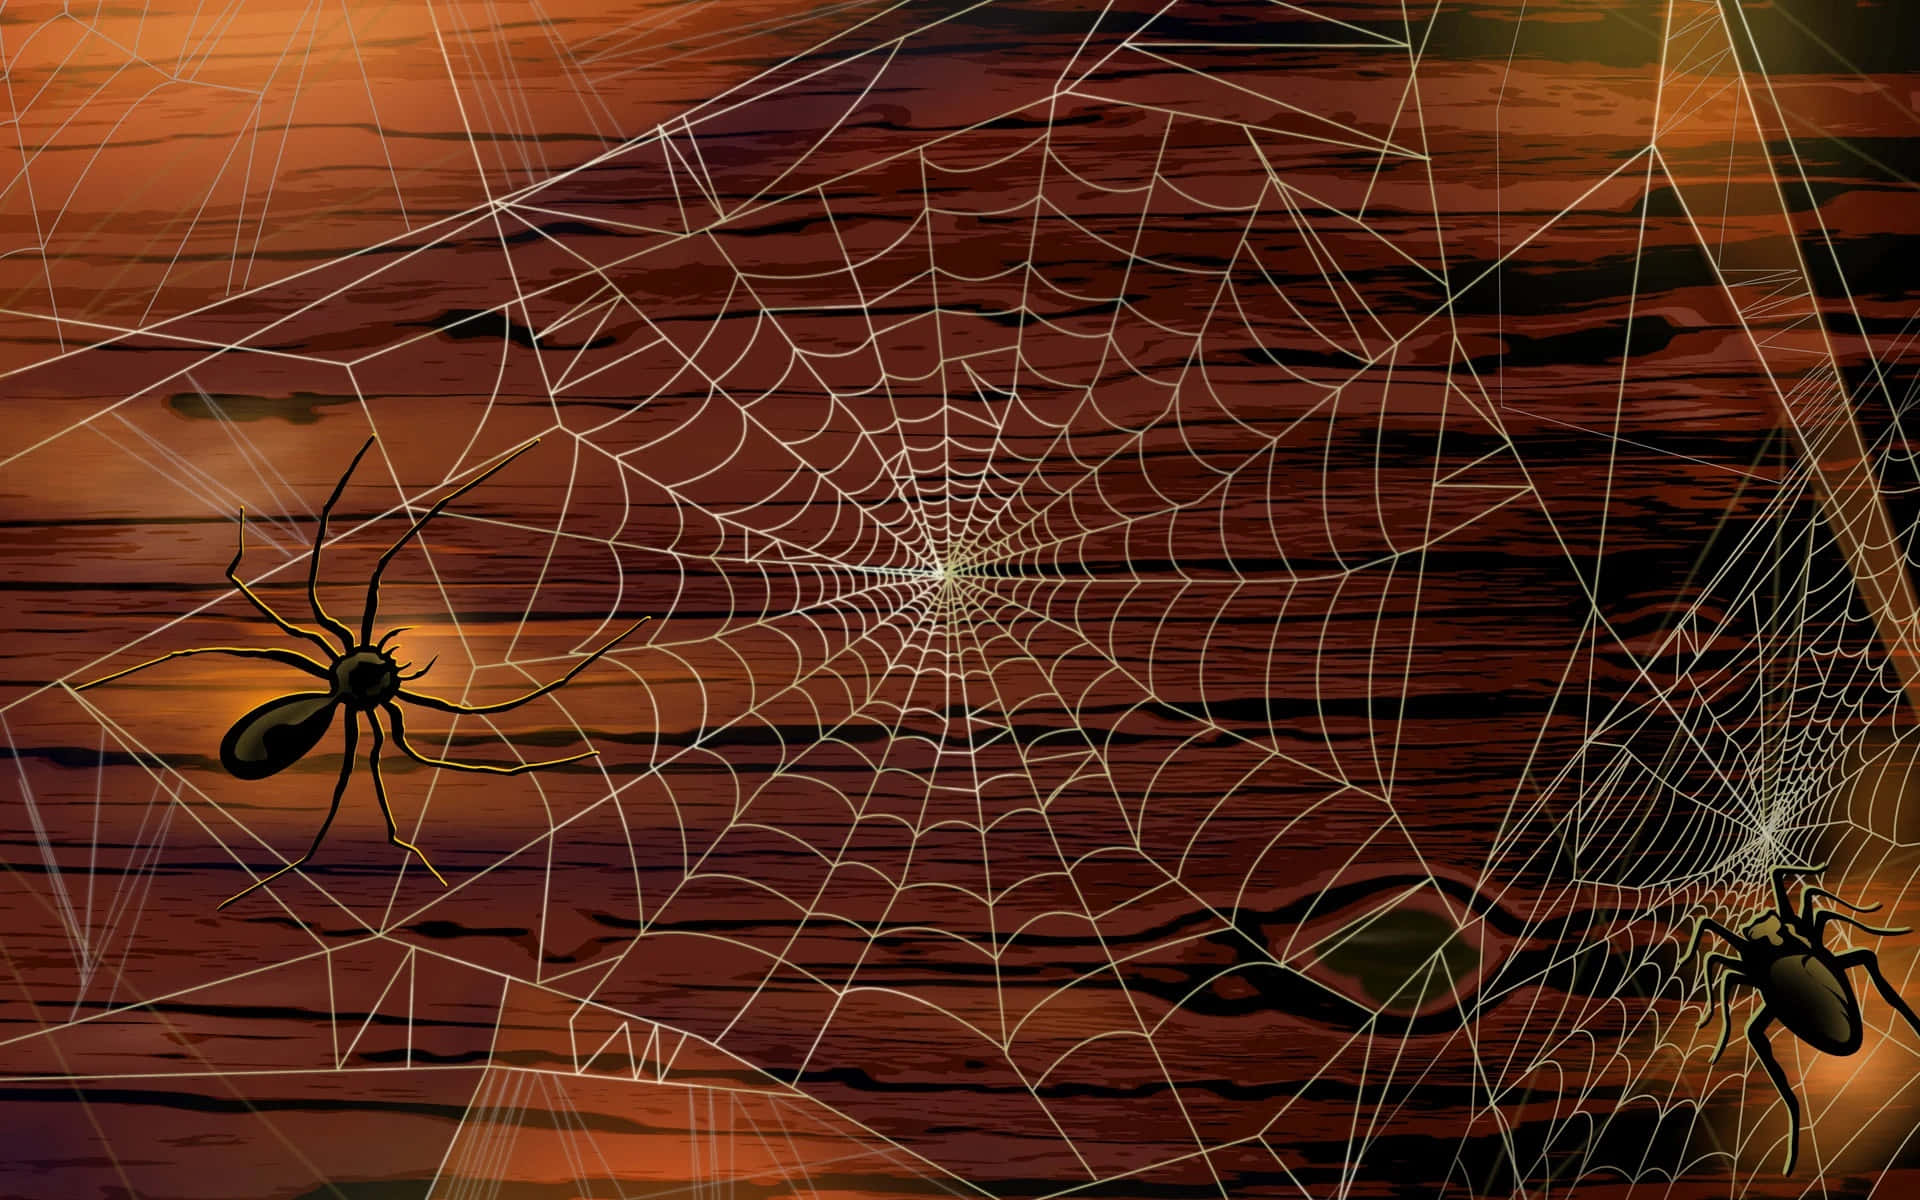 Download A Spider Web With Spiders On It | Wallpapers.com